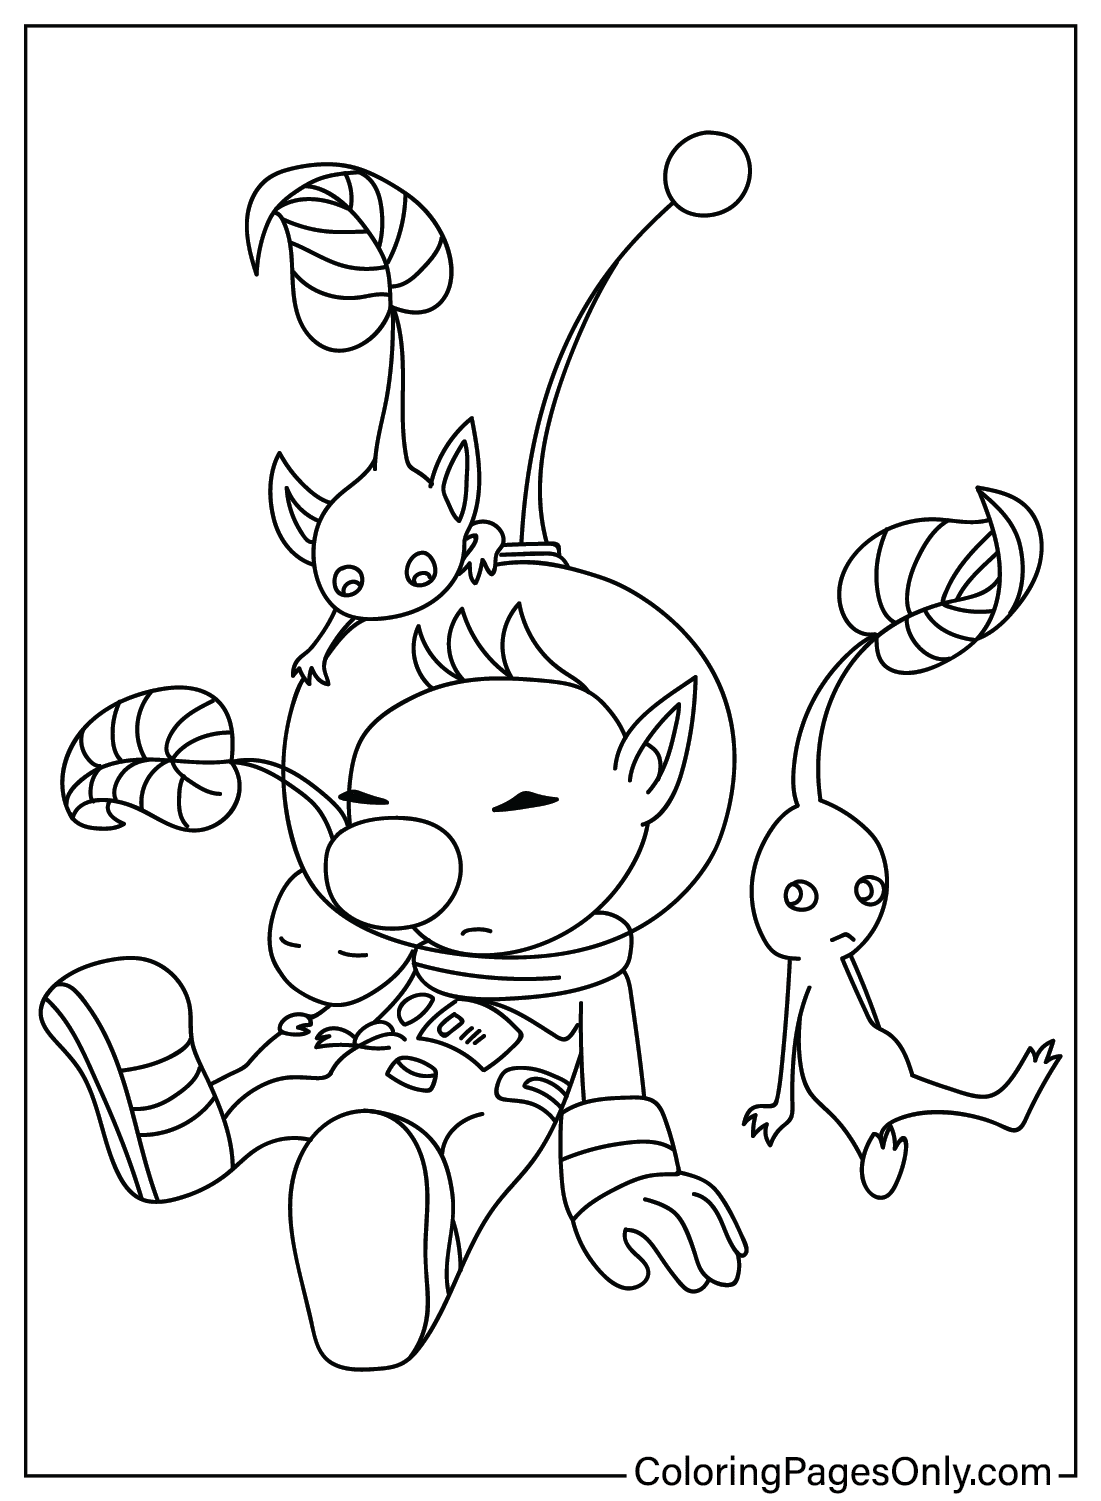 Pikmin Coloring Pages to Download from Pikmin